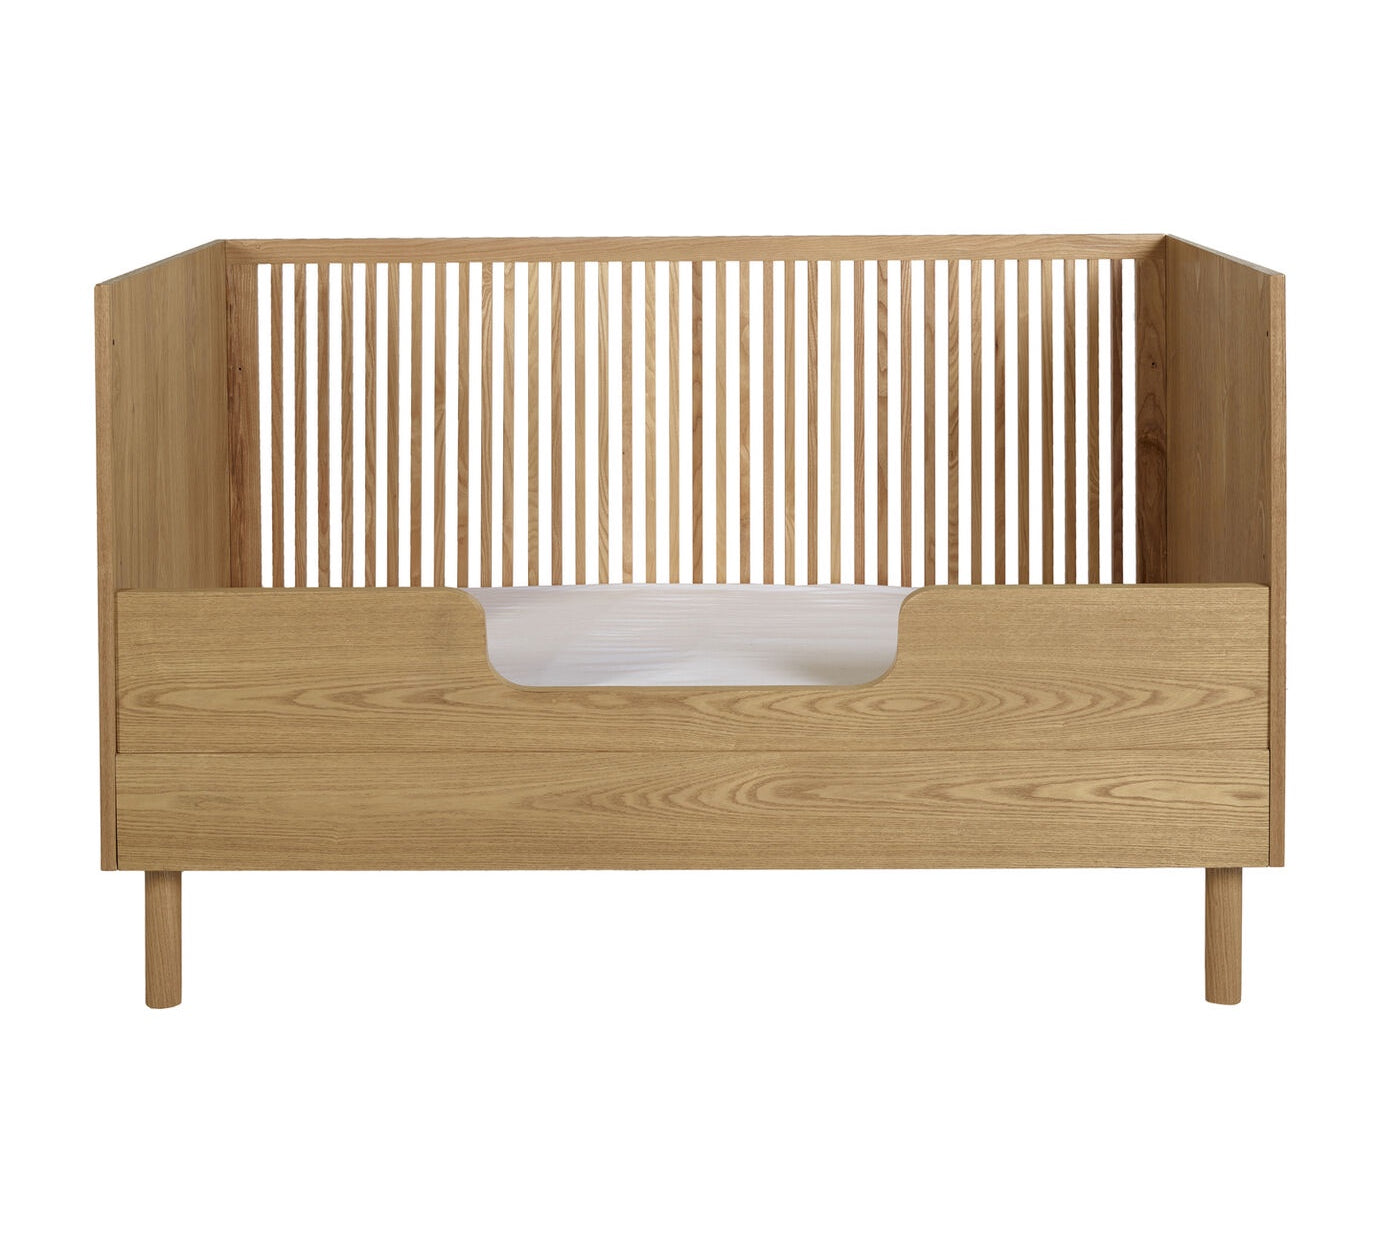 Deer Industries Baby Furniture, Quax Series, High quality wooden baby furniture made in Singapore